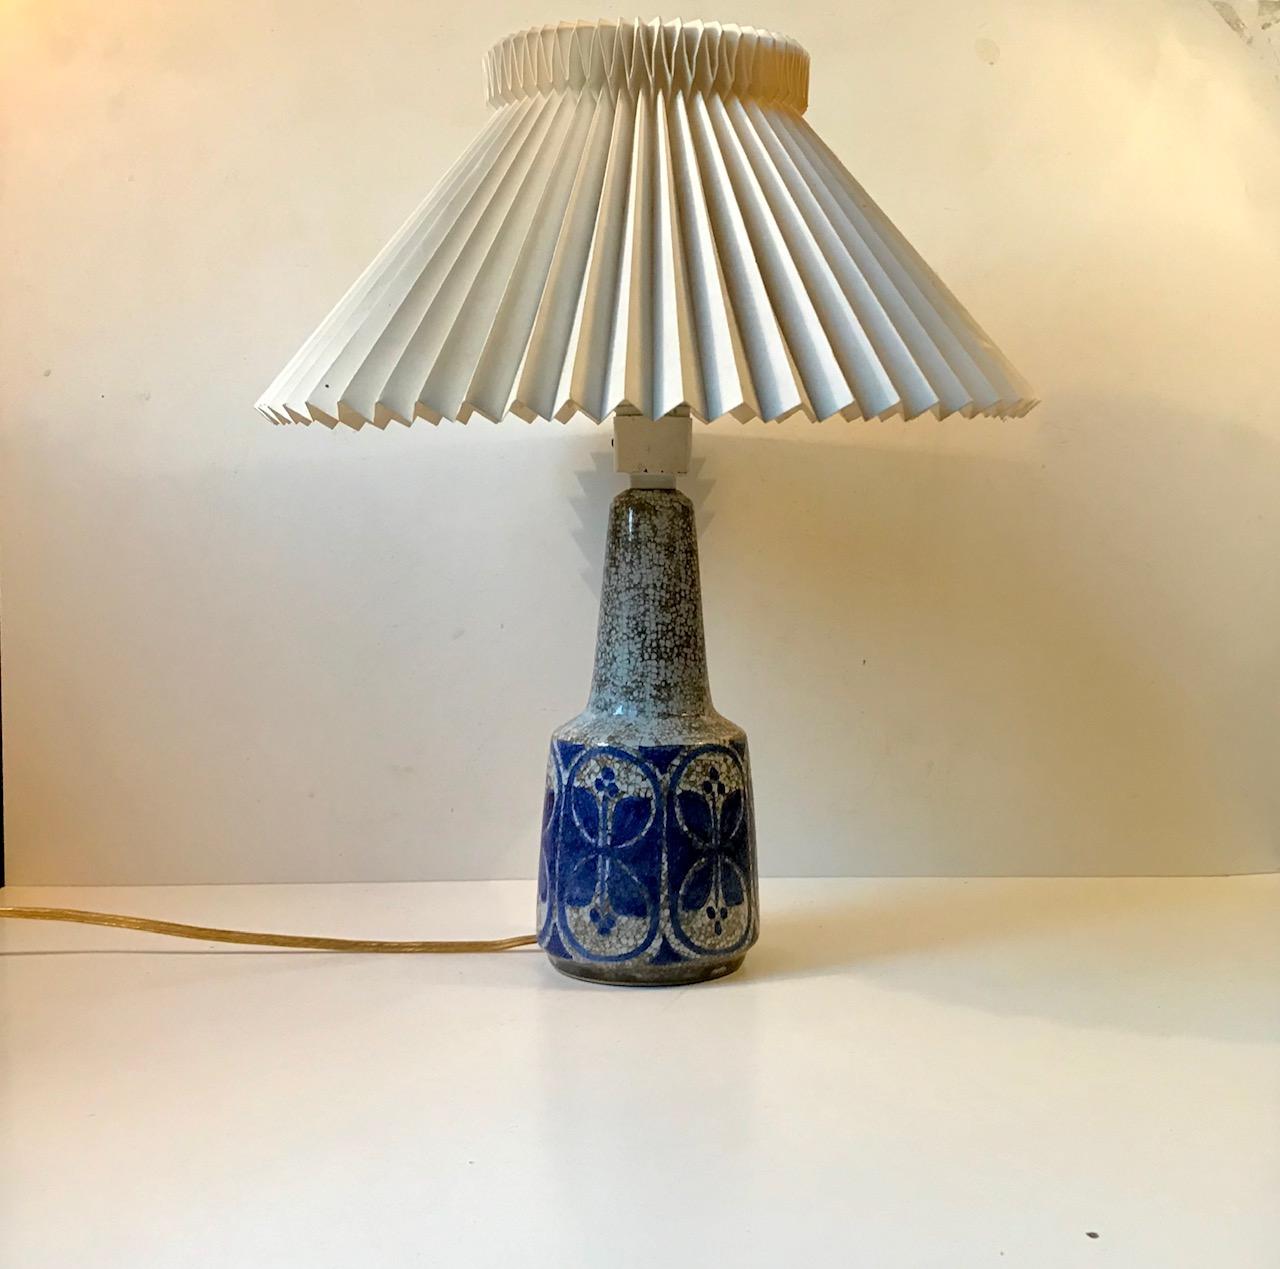 Mid-Century Modern Marianne Starck Stoneware Table Lamp with Persia Crackle Glaze, Denmark, 1970s